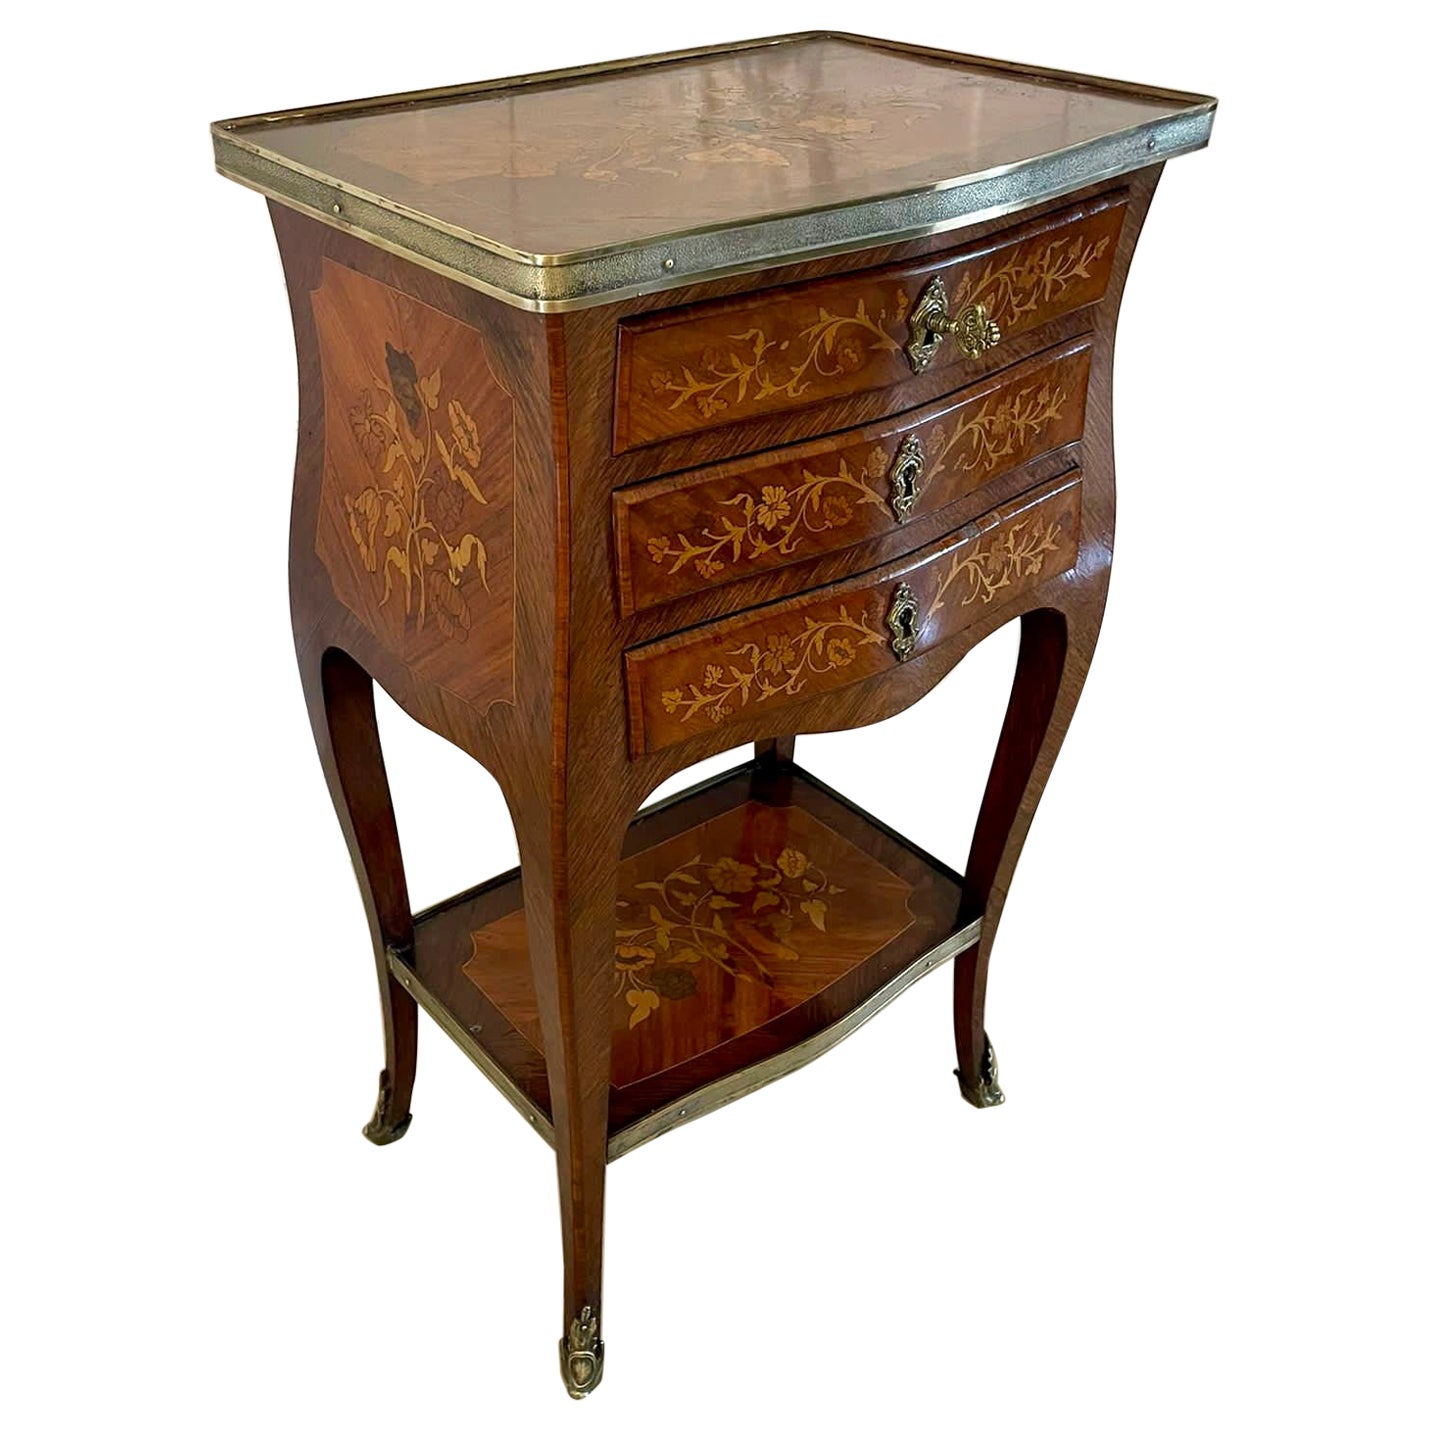 Antique Freestanding Quality Marquetry Inlaid Kingwood Chest of Drawers For Sale